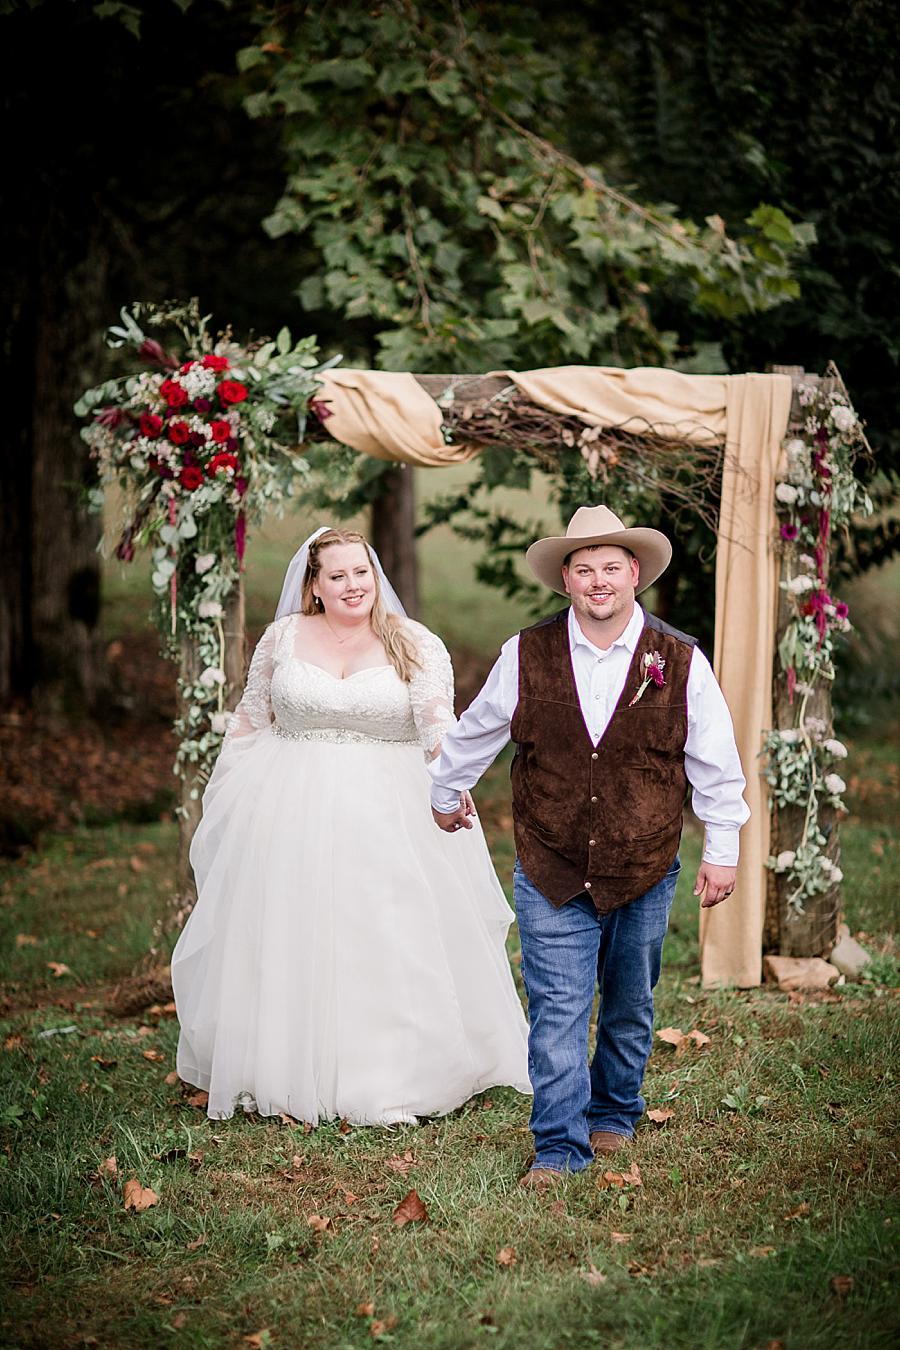 Holding hands at this Sampson's Hollow Fall Wedding by Knoxville Wedding Photographer, Amanda May Photos.